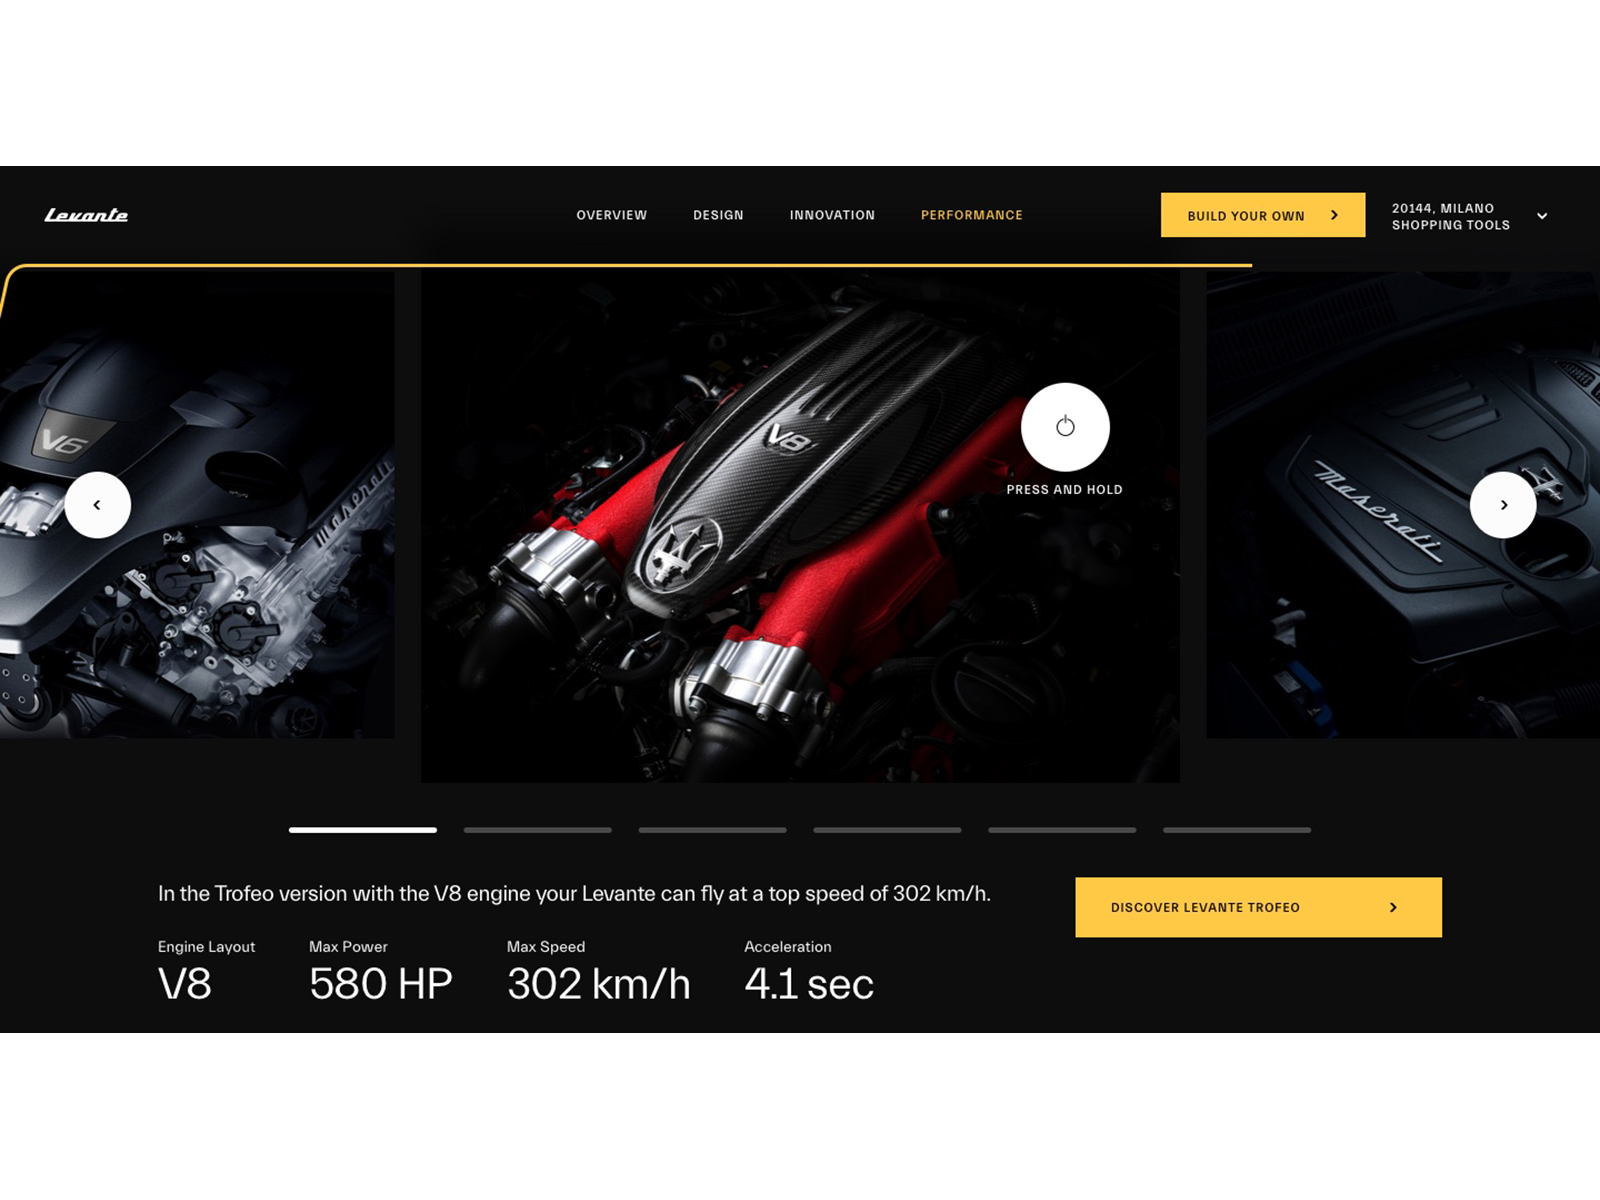 PRODUCT PAGE | The models. Rich & interactive content on the cars